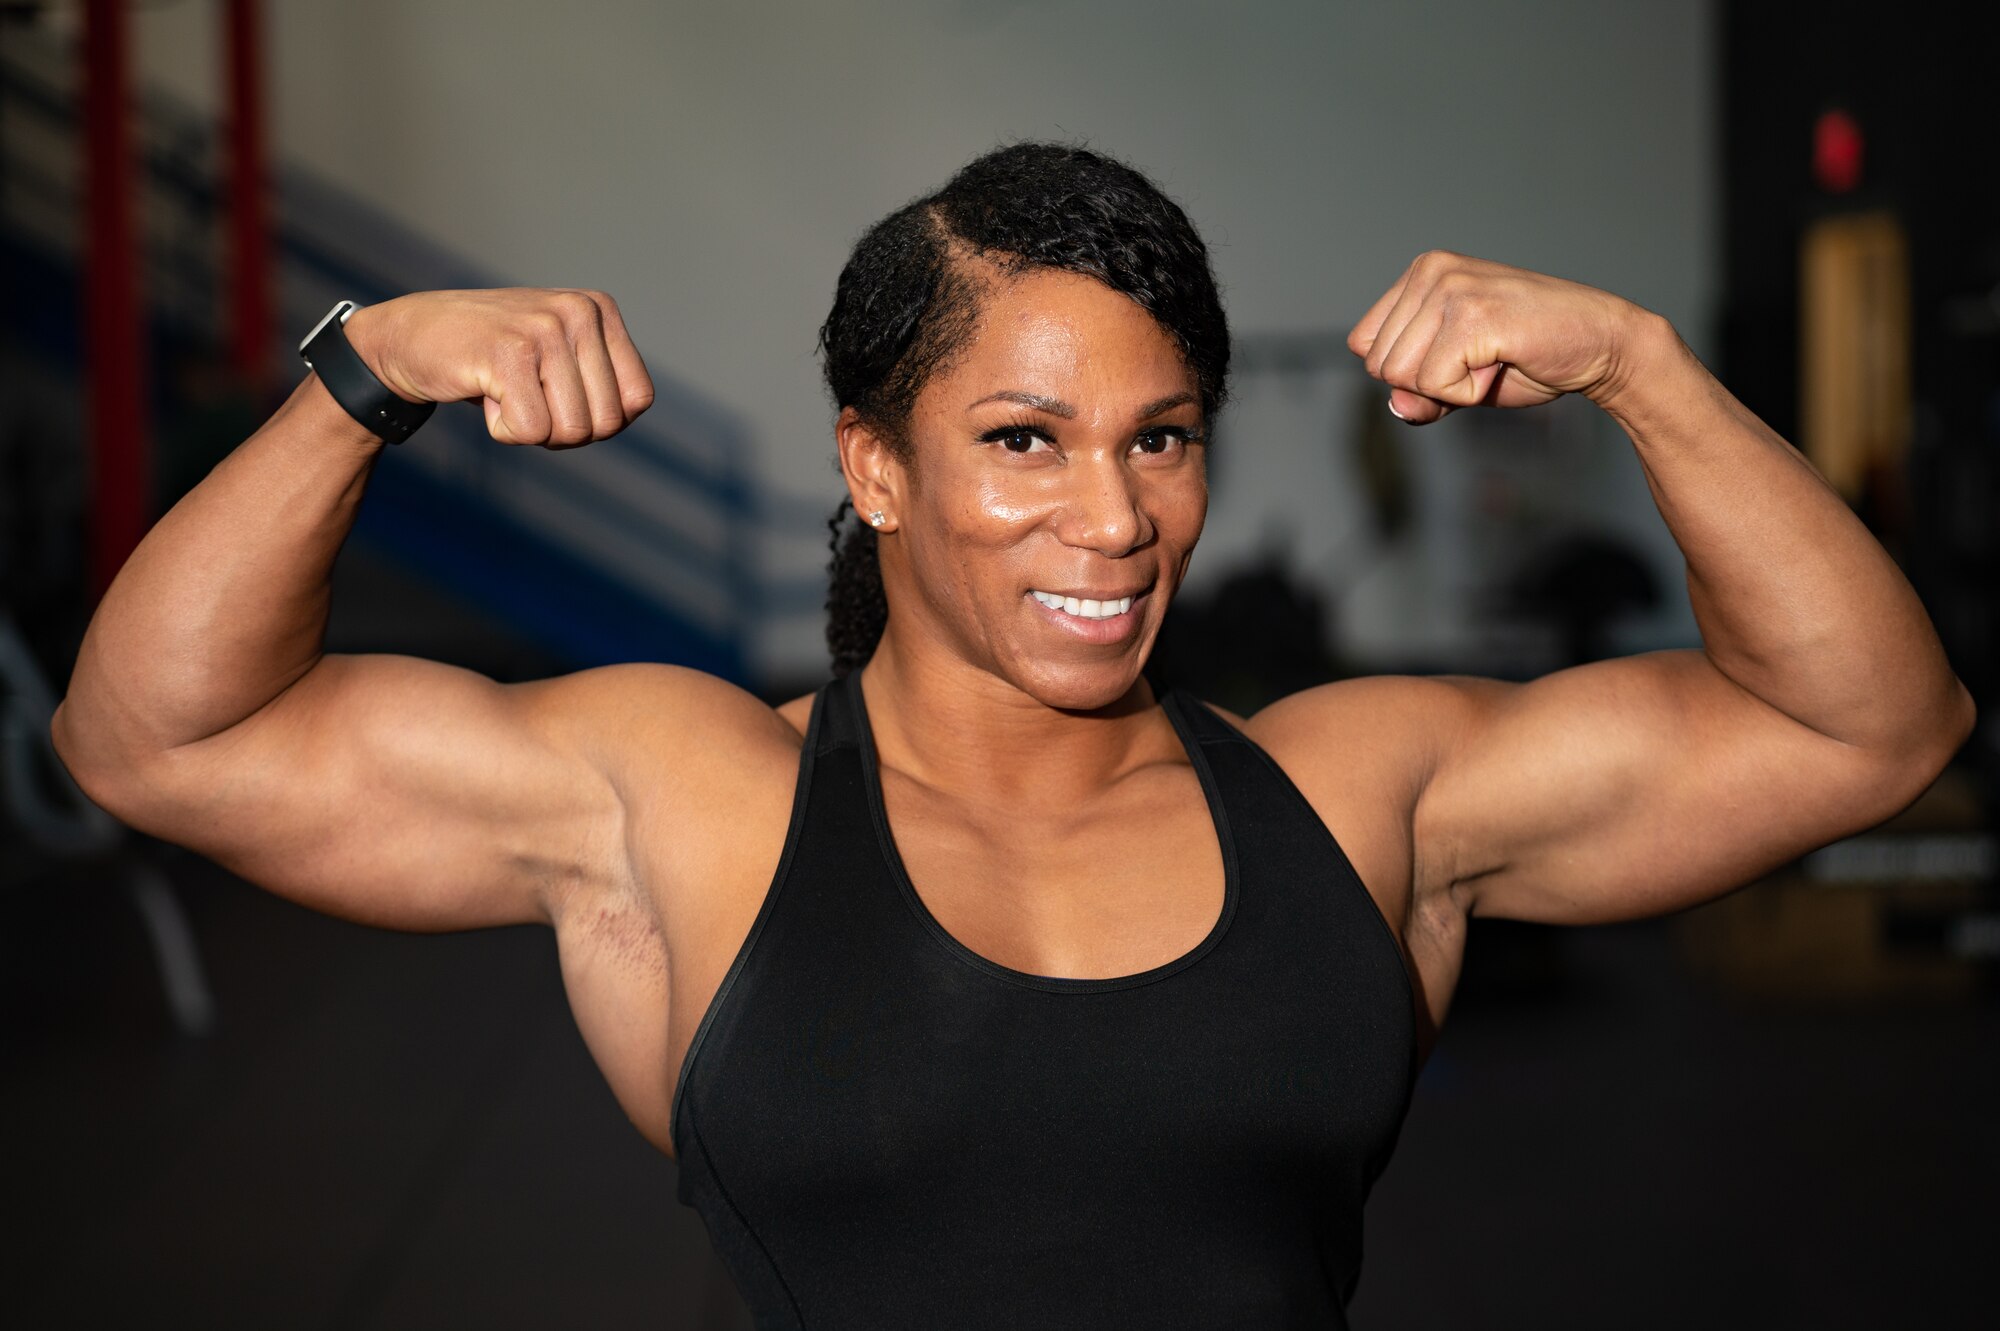 Age is nothing but a number: Award-winning bodybuilder sculpts her way to  better fitness > MacDill Air Force Base > Display